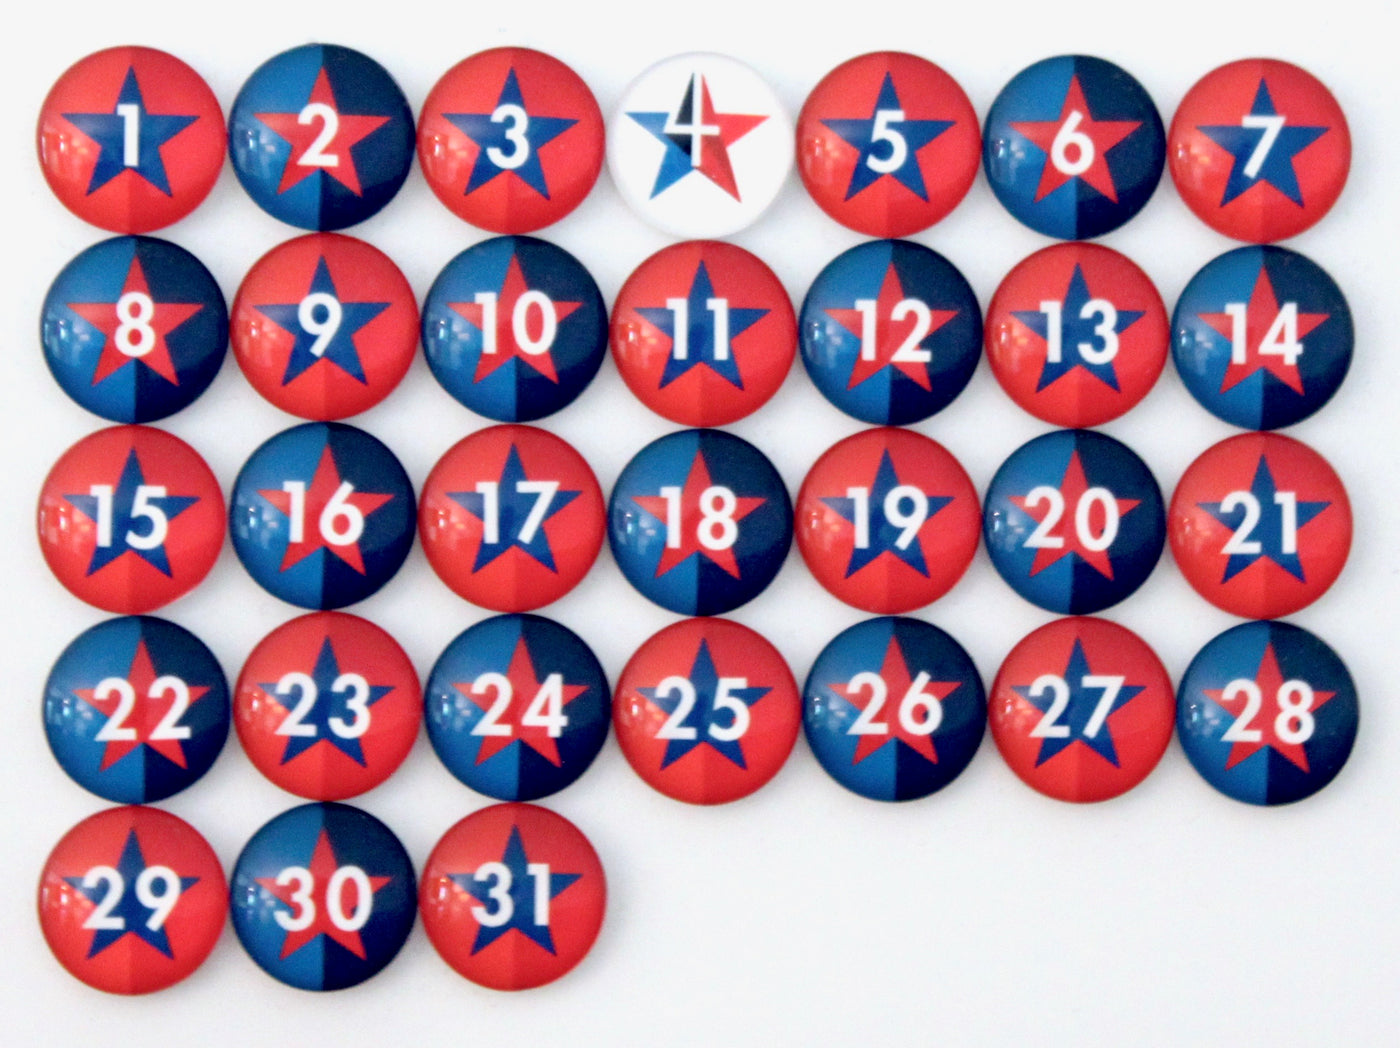 Number Magnets - Stars - Patriotic Independence Day - 4th of July!